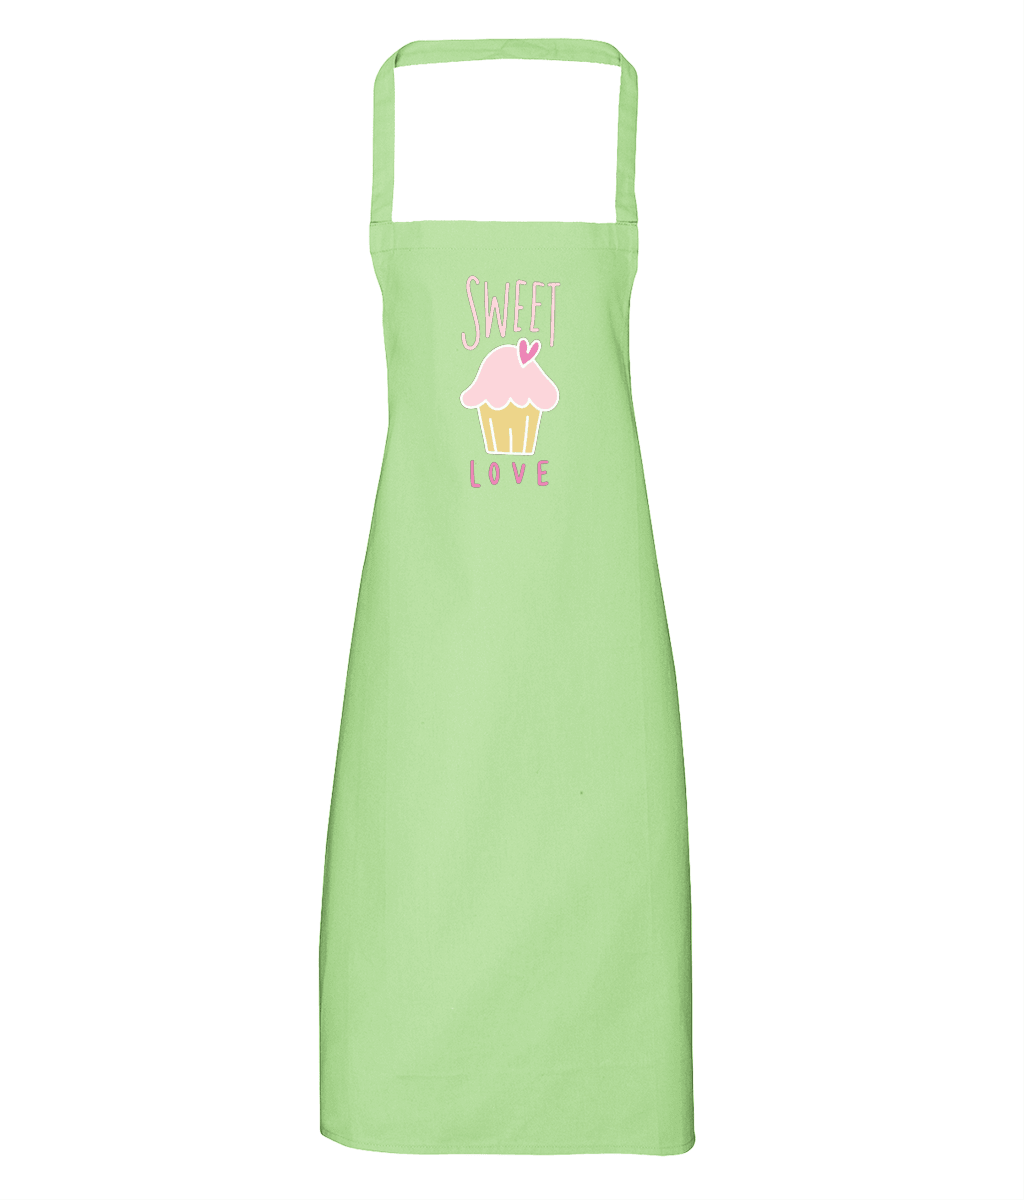 Sweet Love Cotton Apron - DuvetDay.co.uk